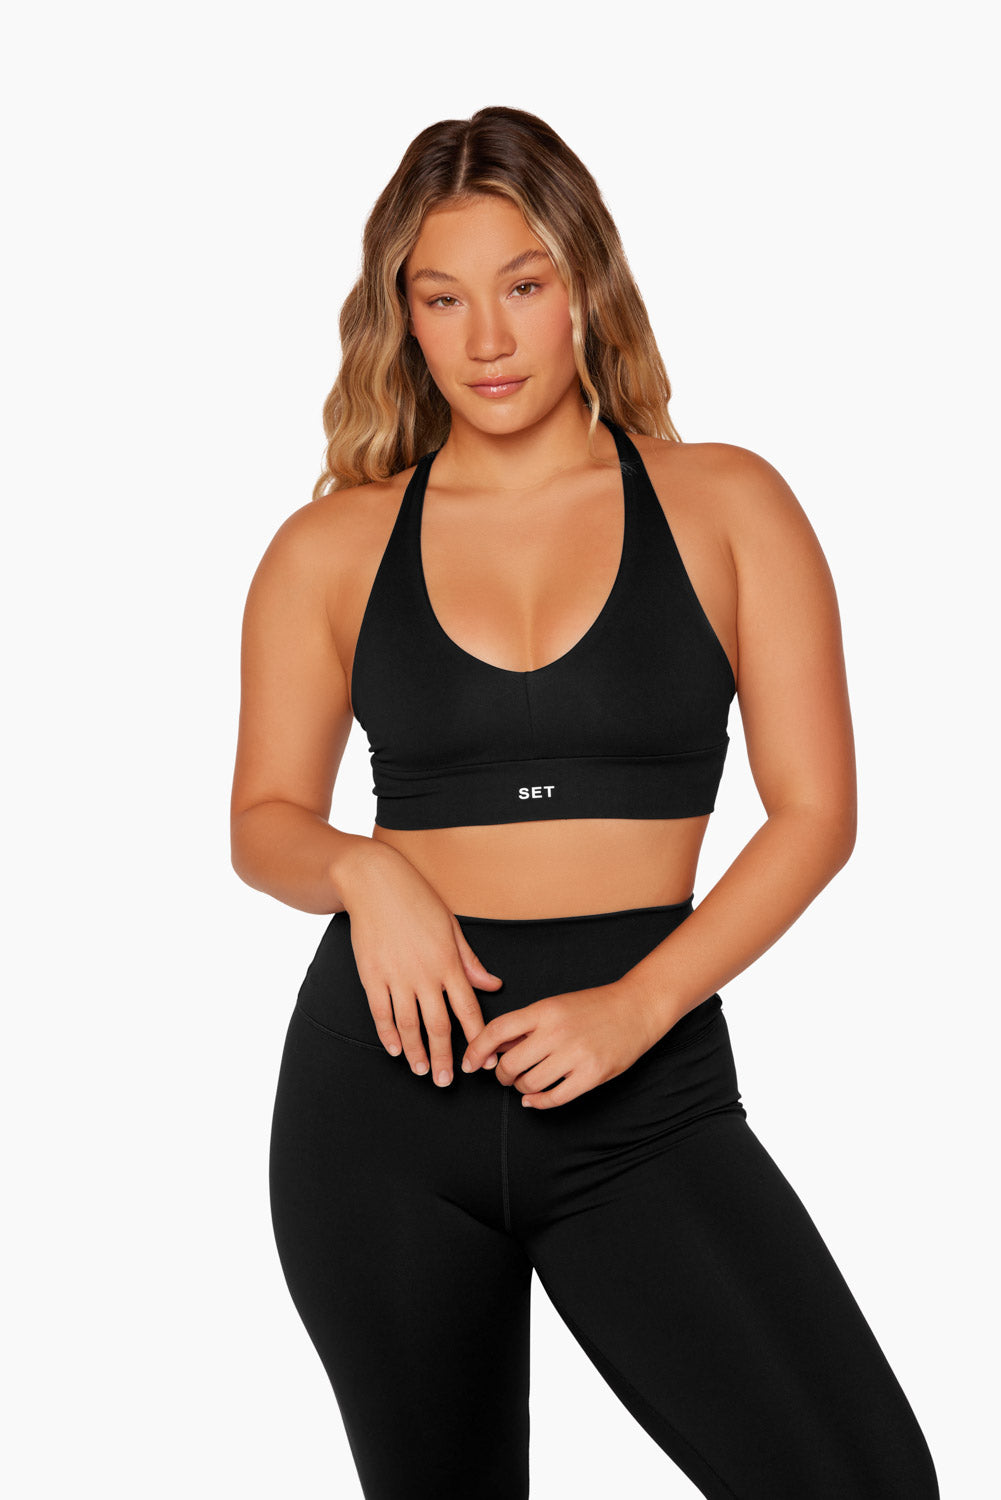 LUXFORM® RACER V BRA - ONYX Featured Image